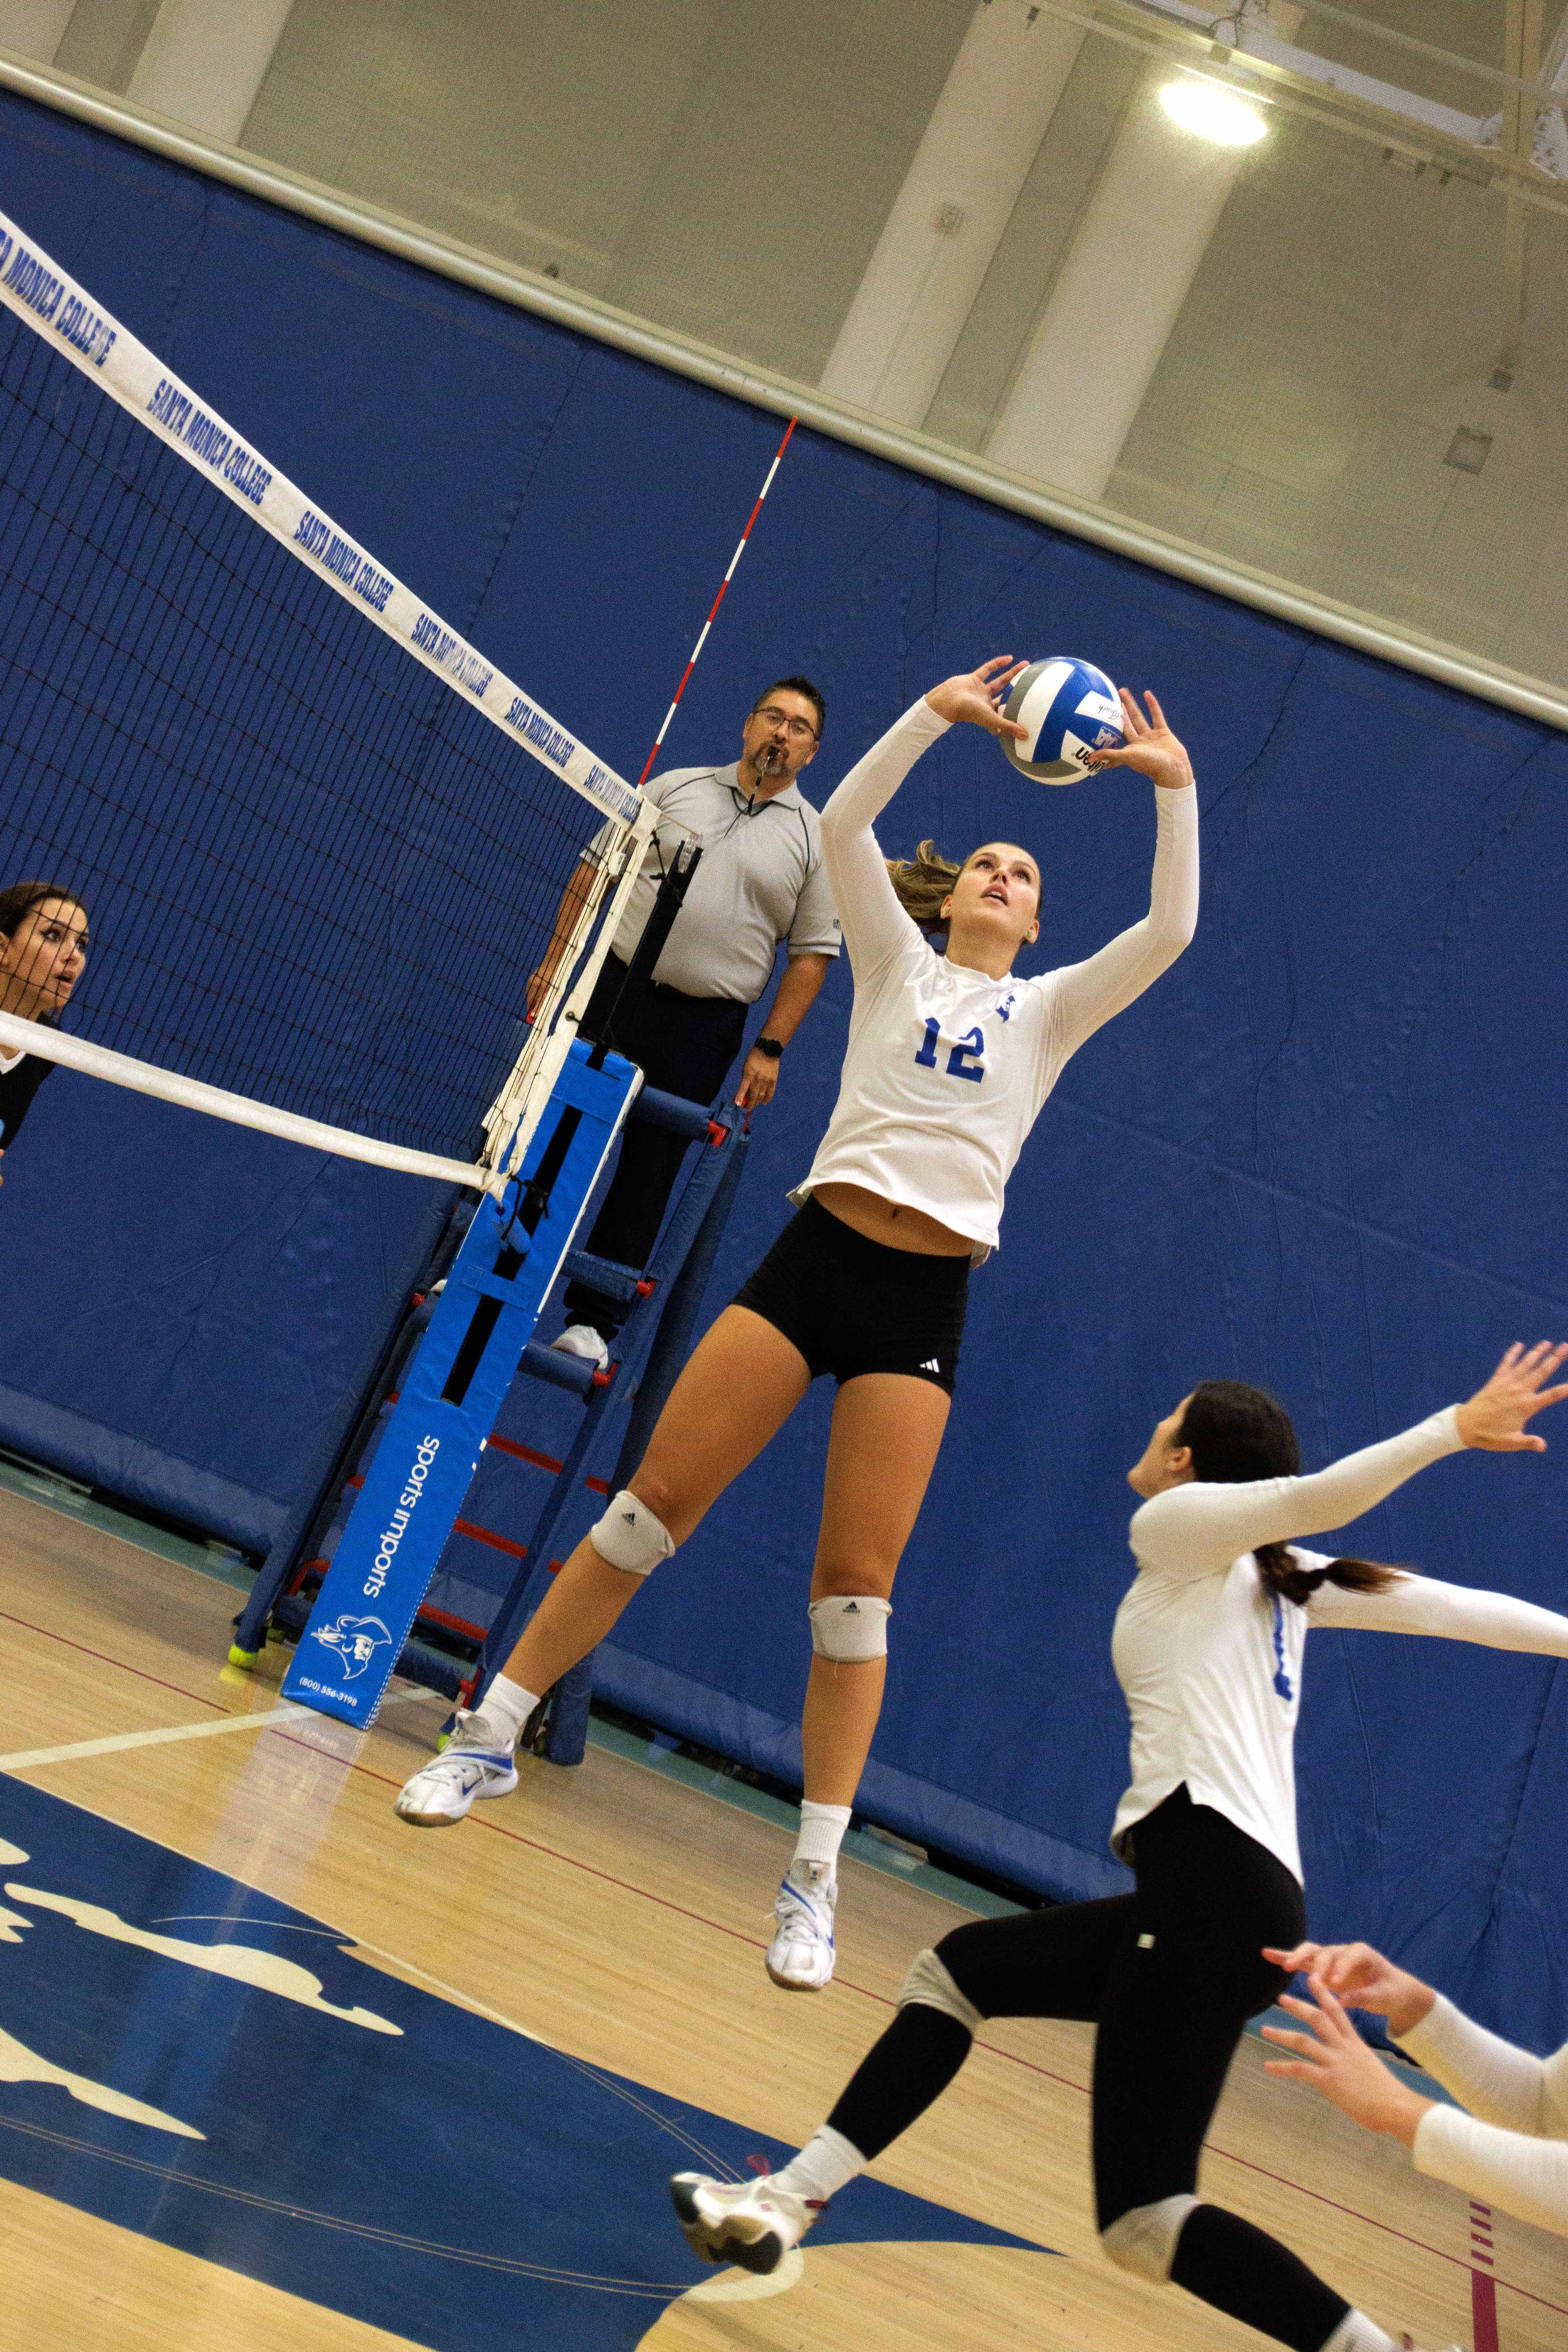  Setter Mia Paulson, number 12, performs an overhead pass to set up an attack for outside hitter Maiella Riva, number 1, during the match between Santa Monica College (SMC) and San Diego Miramar Women's Volleyball team at the SMC gymnasium, Santa Mon